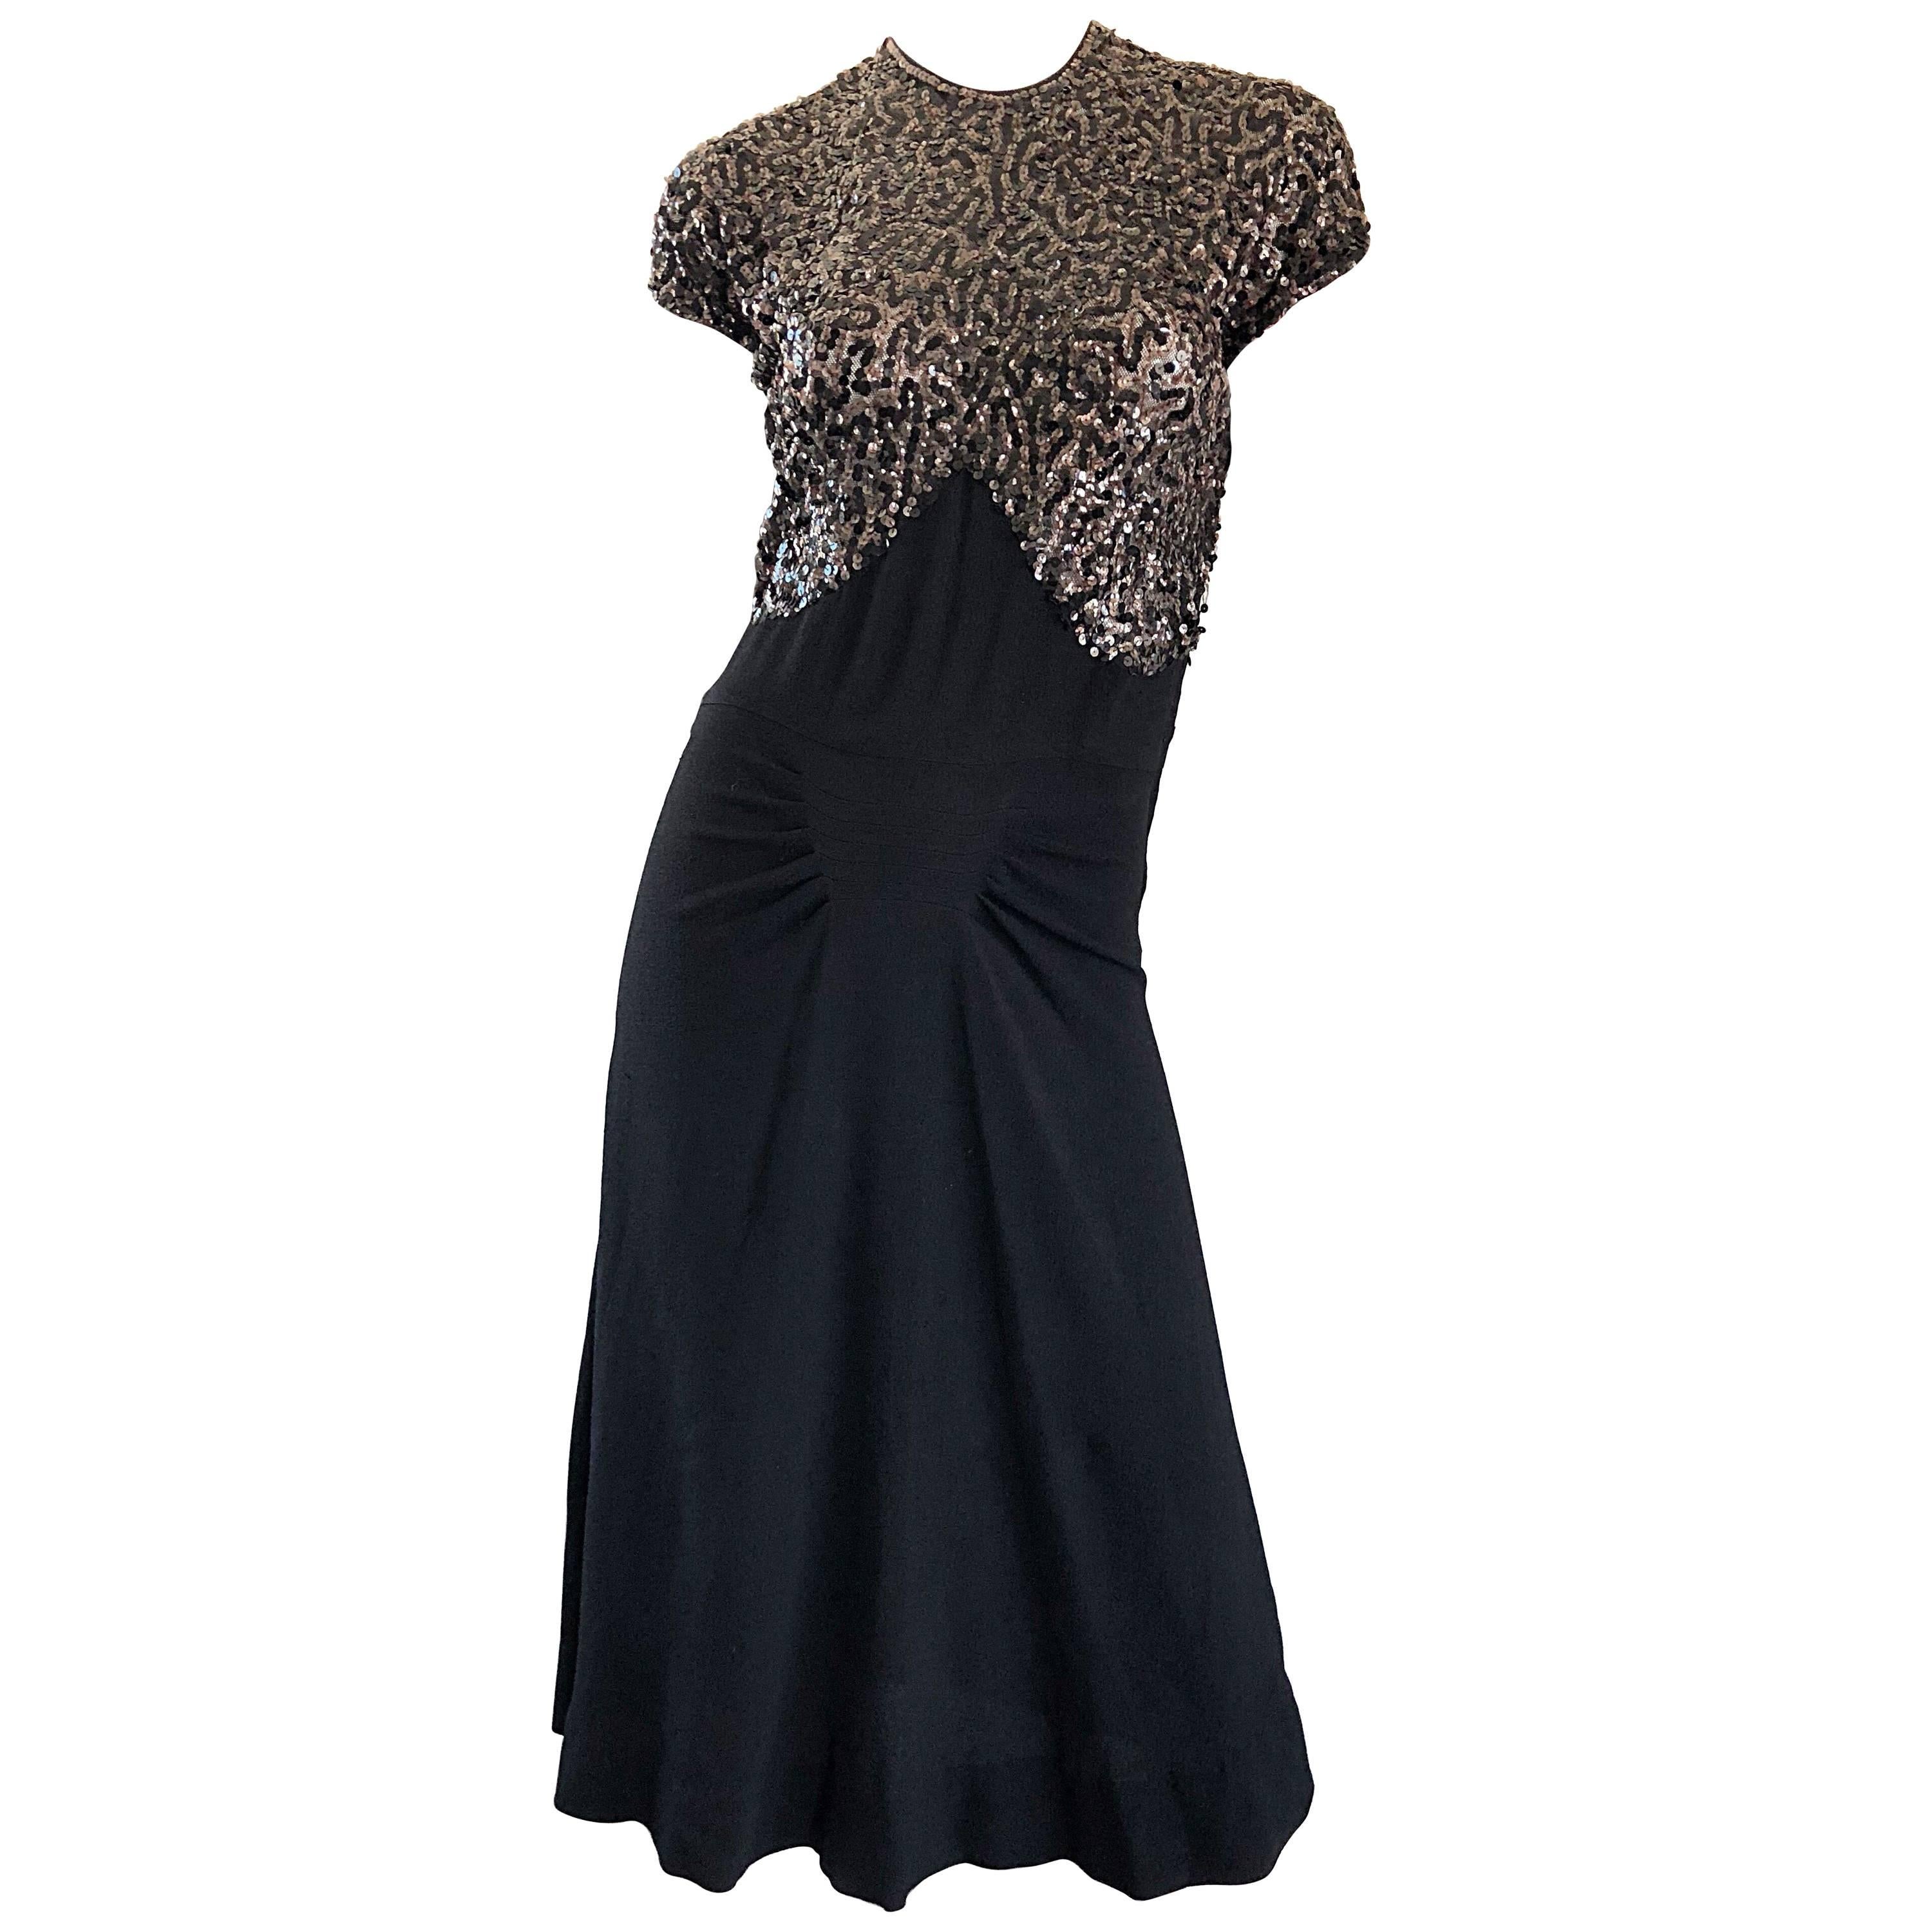 1940s Black Crepe Evening Dress Gown Sequins Pleated